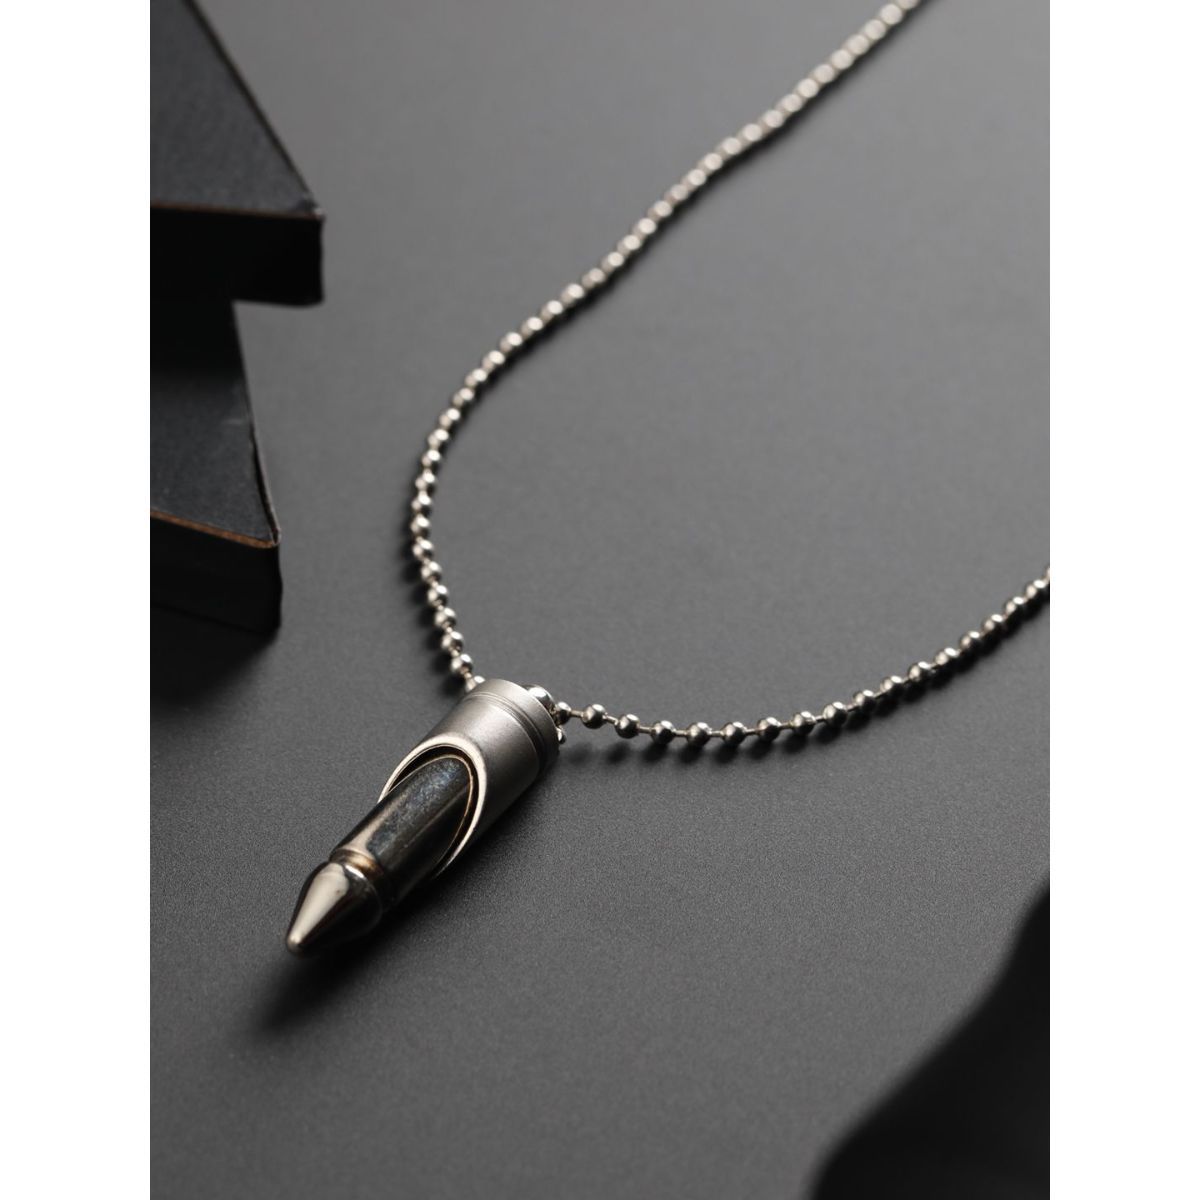 Unique Bullet Necklace for Men Male Accessories collar masculino Can Be  Opened | eBay